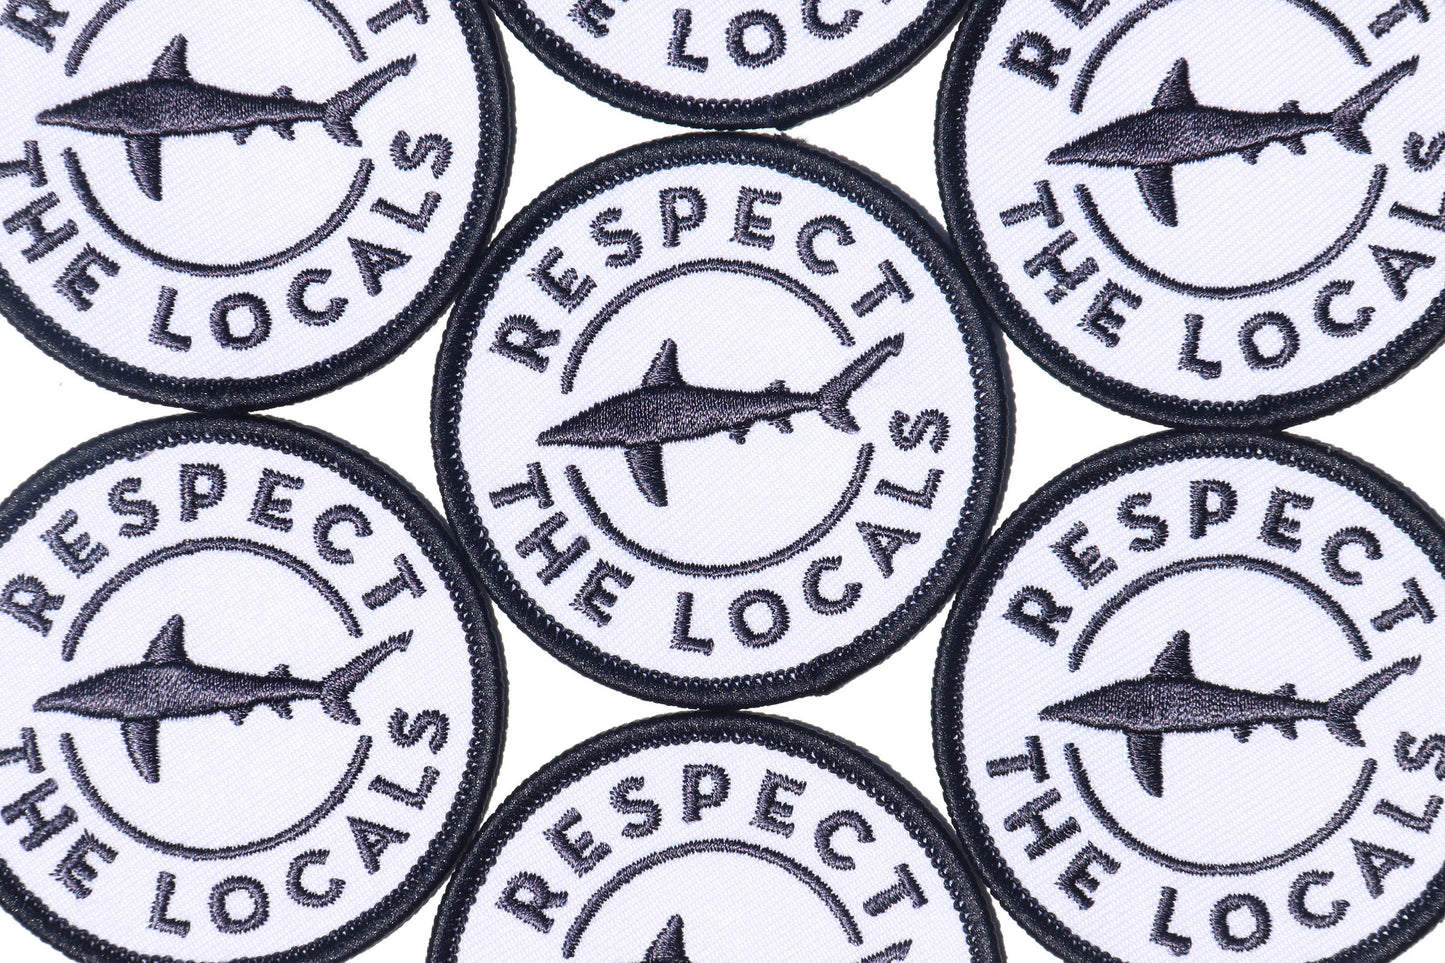 Respect the Locals Patch